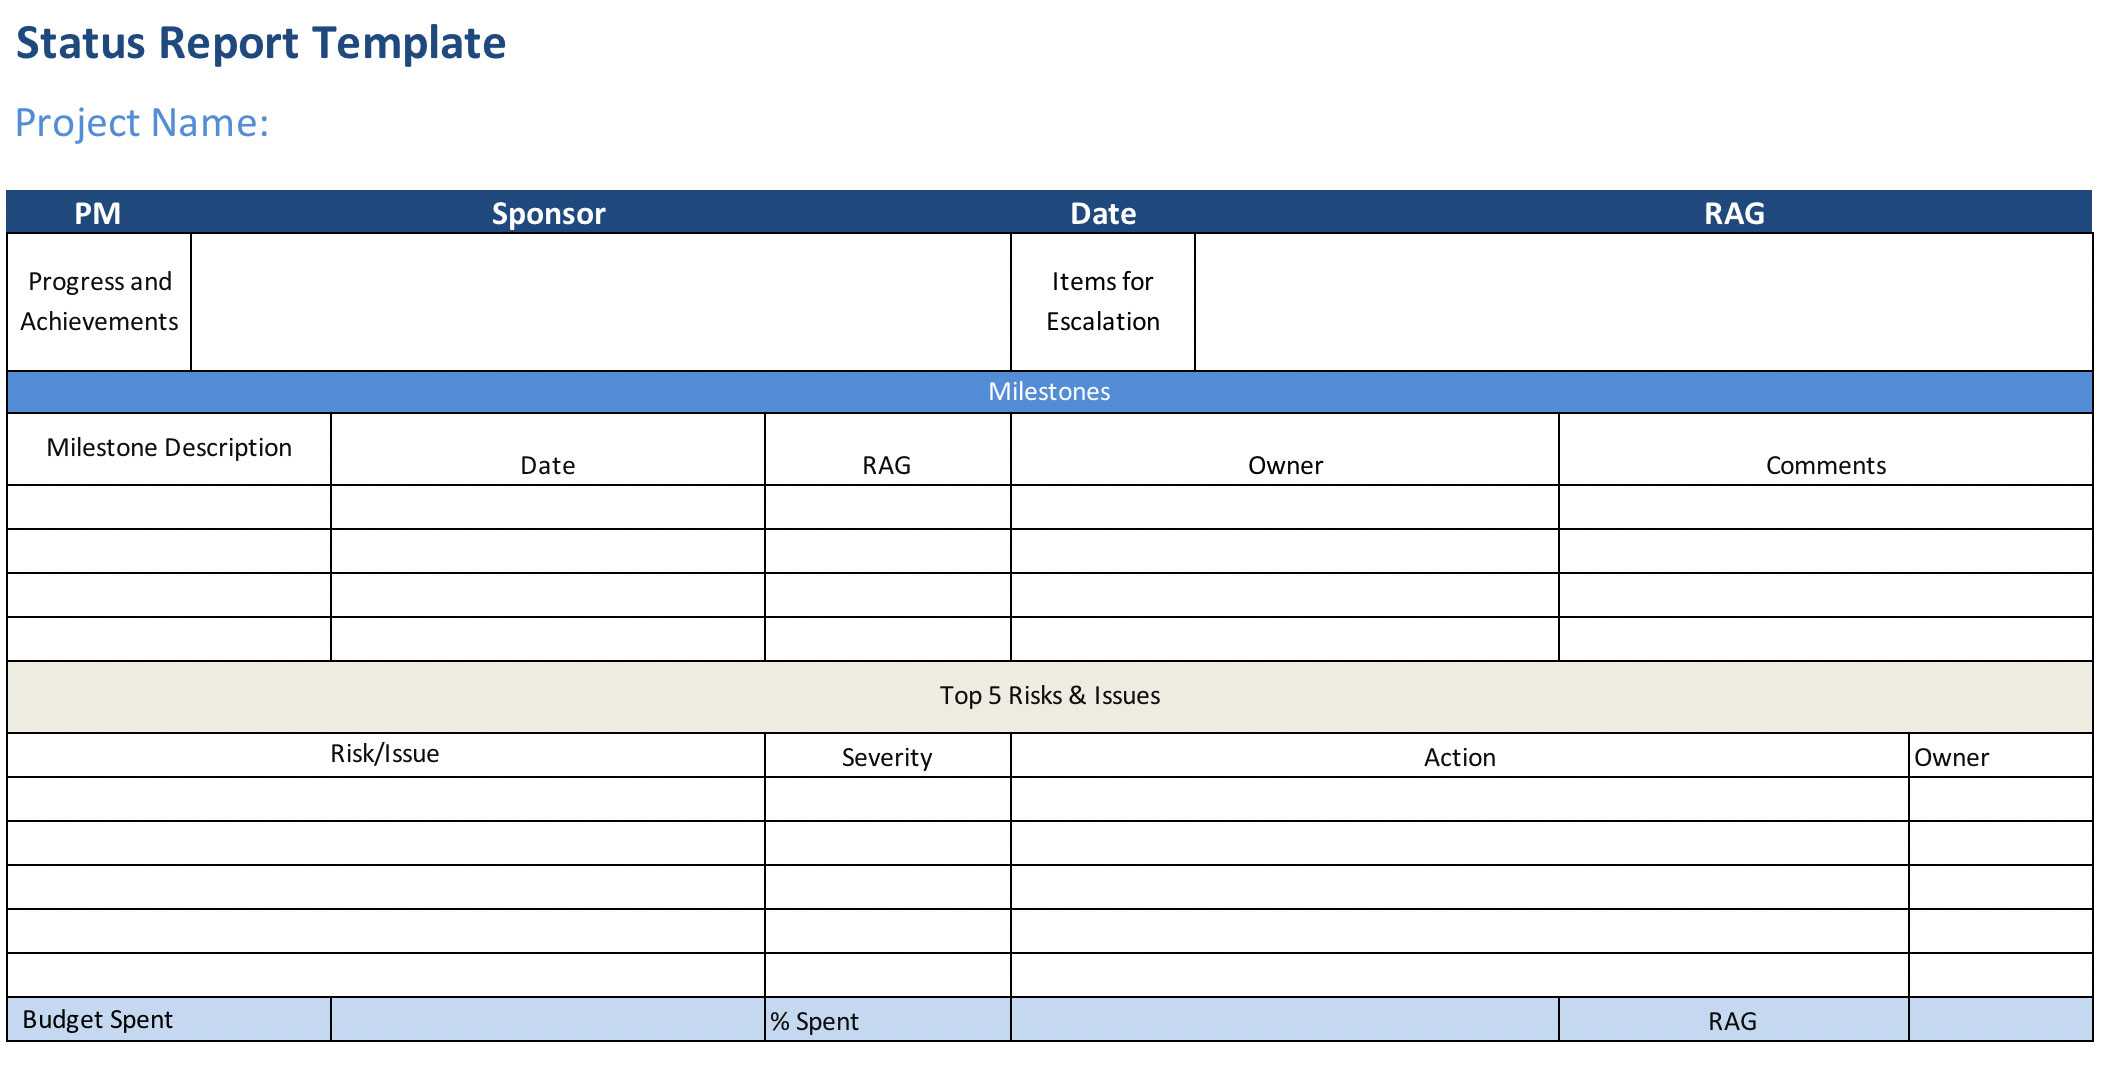 Project Status Report (Free Excel Template) - Projectmanager Intended For Executive Summary Project Status Report Template